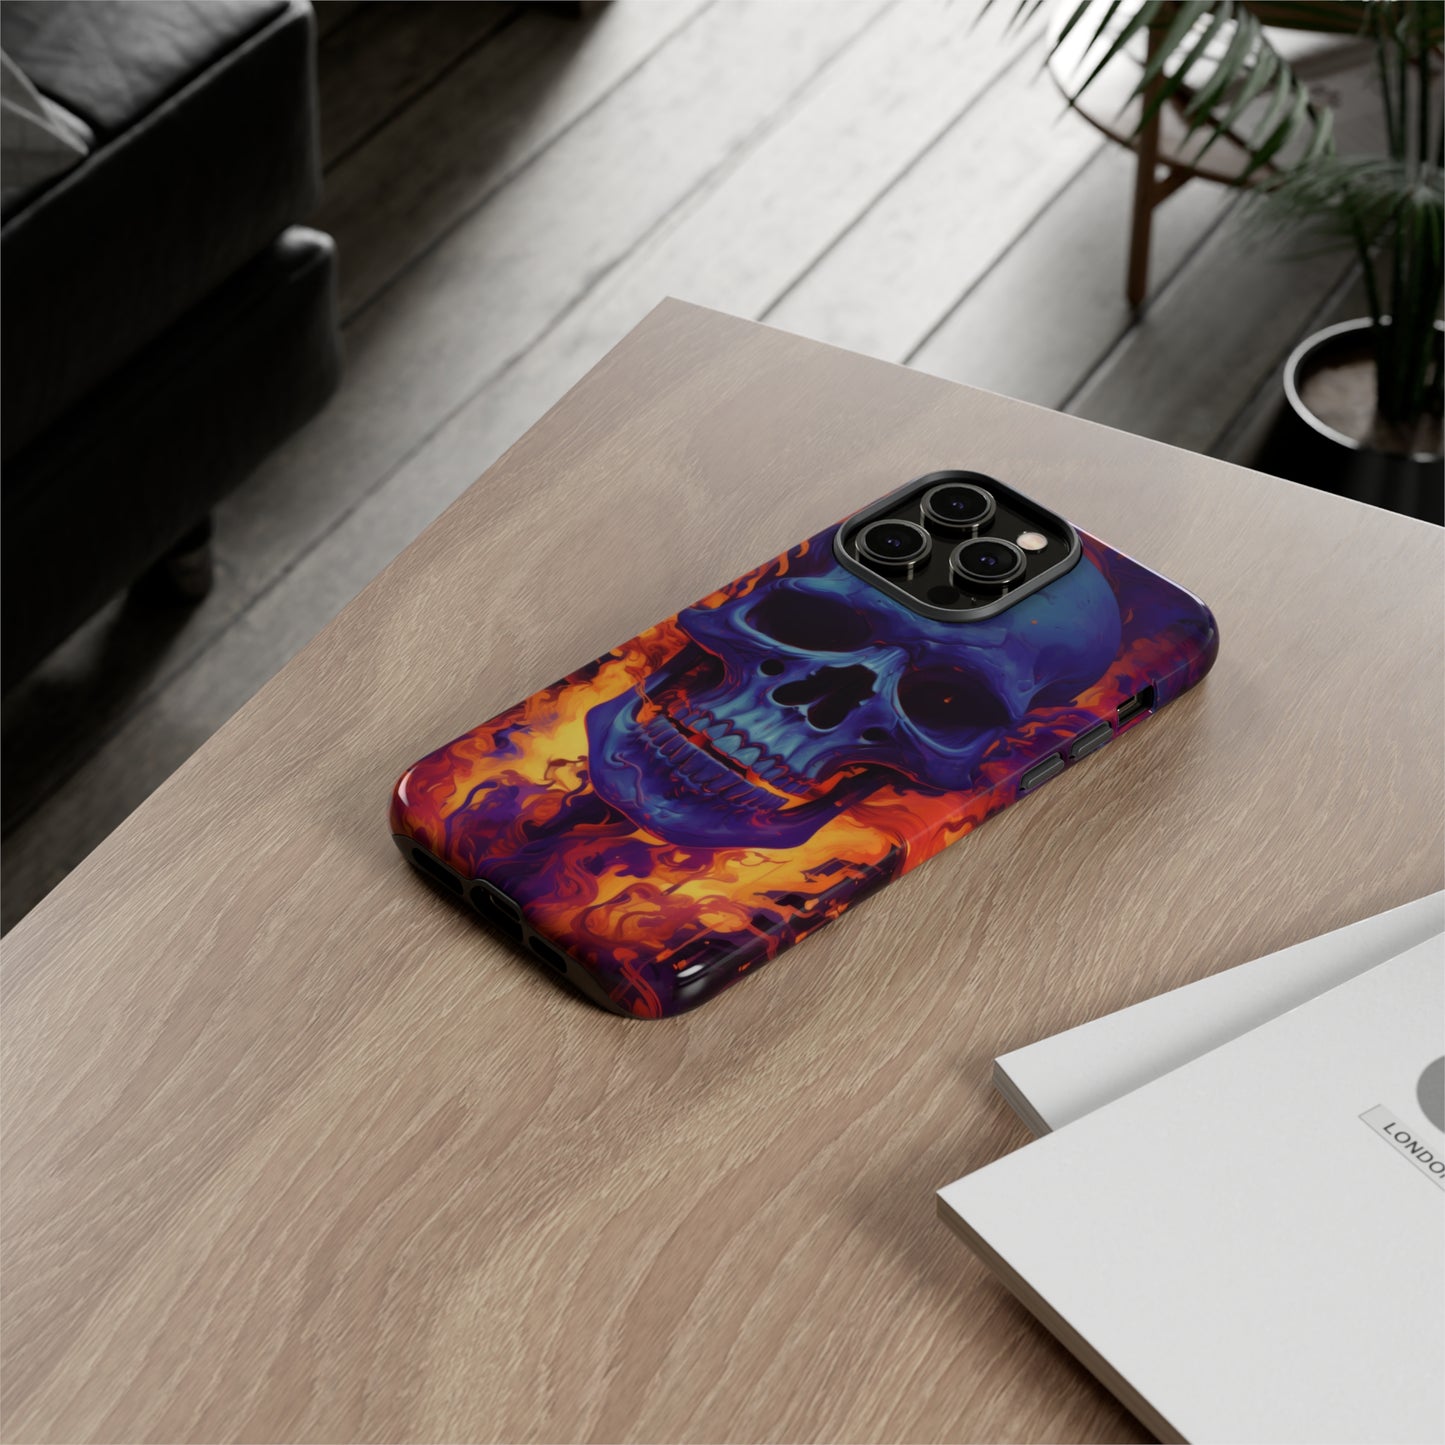 Vivid Eruption: Purple Skull and Colorful Smoke Phone Case for iPhone, Samsung, Pixel